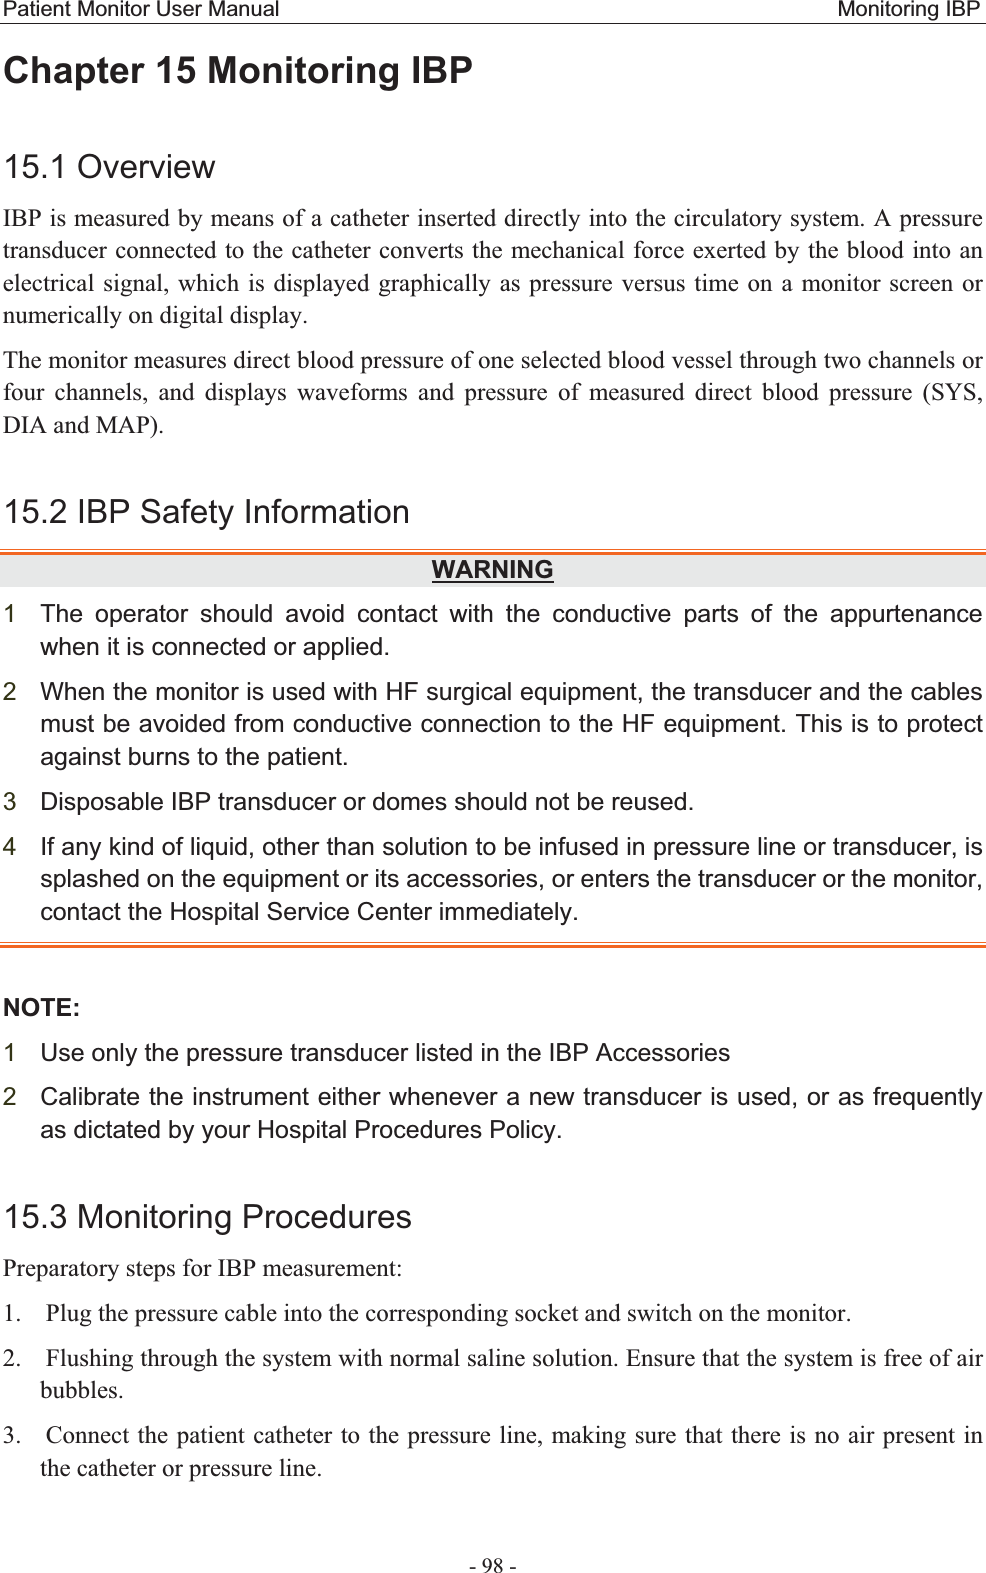 Patient Monitor User Manual                                                   Monitoring IBP  - 98 - Chapter 15 Monitoring IBP15.1 OverviewIBP is measured by means of a catheter inserted directly into the circulatory system. A pressure transducer connected to the catheter converts the mechanical force exerted by the blood into an electrical signal, which is displayed graphically as pressure versus time on a monitor screen or numerically on digital display. The monitor measures direct blood pressure of one selected blood vessel through two channels or four channels, and displays waveforms and pressure of measured direct blood pressure (SYS, DIA and MAP).   15.2 IBP Safety InformationWARNING1The operator should avoid contact with the conductive parts of the appurtenance when it is connected or applied. 2When the monitor is used with HF surgical equipment, the transducer and the cables must be avoided from conductive connection to the HF equipment. This is to protect against burns to the patient.3Disposable IBP transducer or domes should not be reused. 4If any kind of liquid, other than solution to be infused in pressure line or transducer, is splashed on the equipment or its accessories, or enters the transducer or the monitor, contact the Hospital Service Center immediately. NOTE:1Use only the pressure transducer listed in the IBP Accessories 2Calibrate the instrument either whenever a new transducer is used, or as frequently as dictated by your Hospital Procedures Policy.15.3 Monitoring ProceduresPreparatory steps for IBP measurement: 1. Plug the pressure cable into the corresponding socket and switch on the monitor. 2. Flushing through the system with normal saline solution. Ensure that the system is free of air bubbles. 3. Connect the patient catheter to the pressure line, making sure that there is no air present in the catheter or pressure line. 